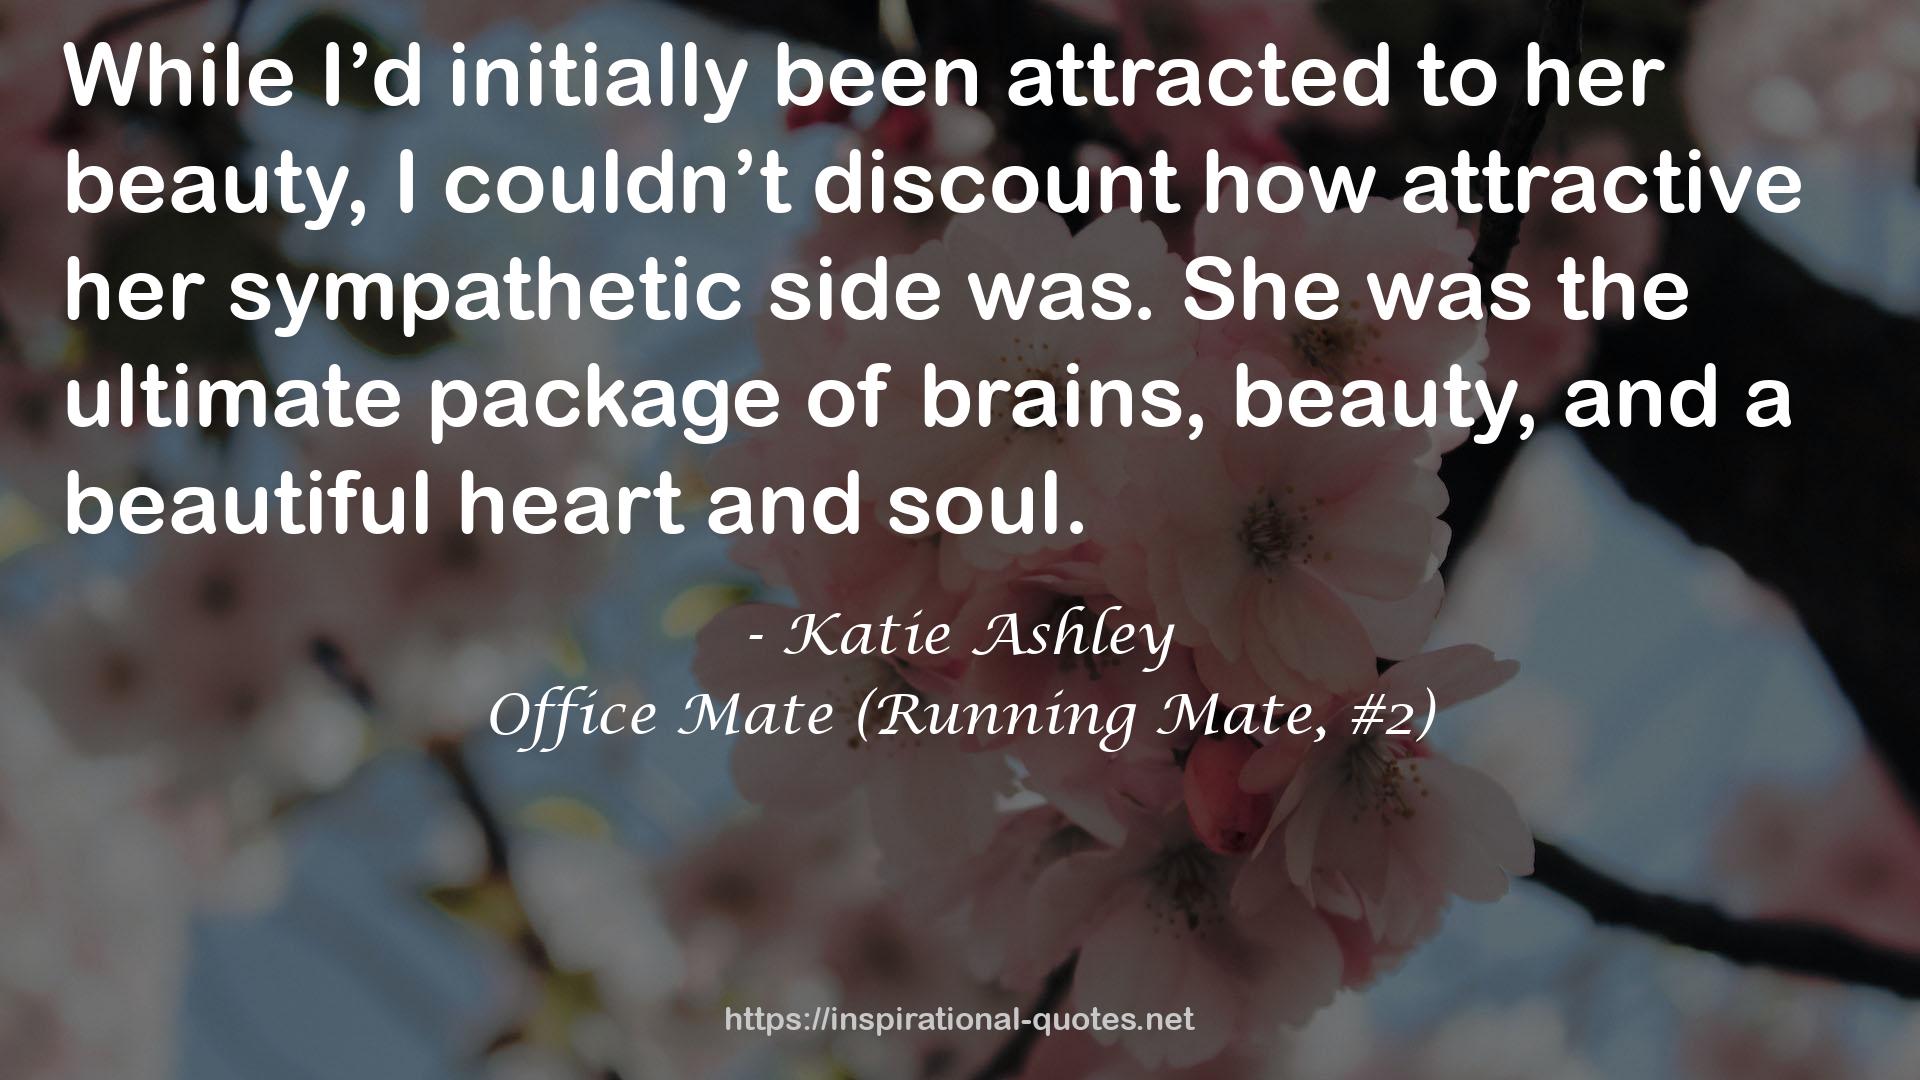 Office Mate (Running Mate, #2) QUOTES